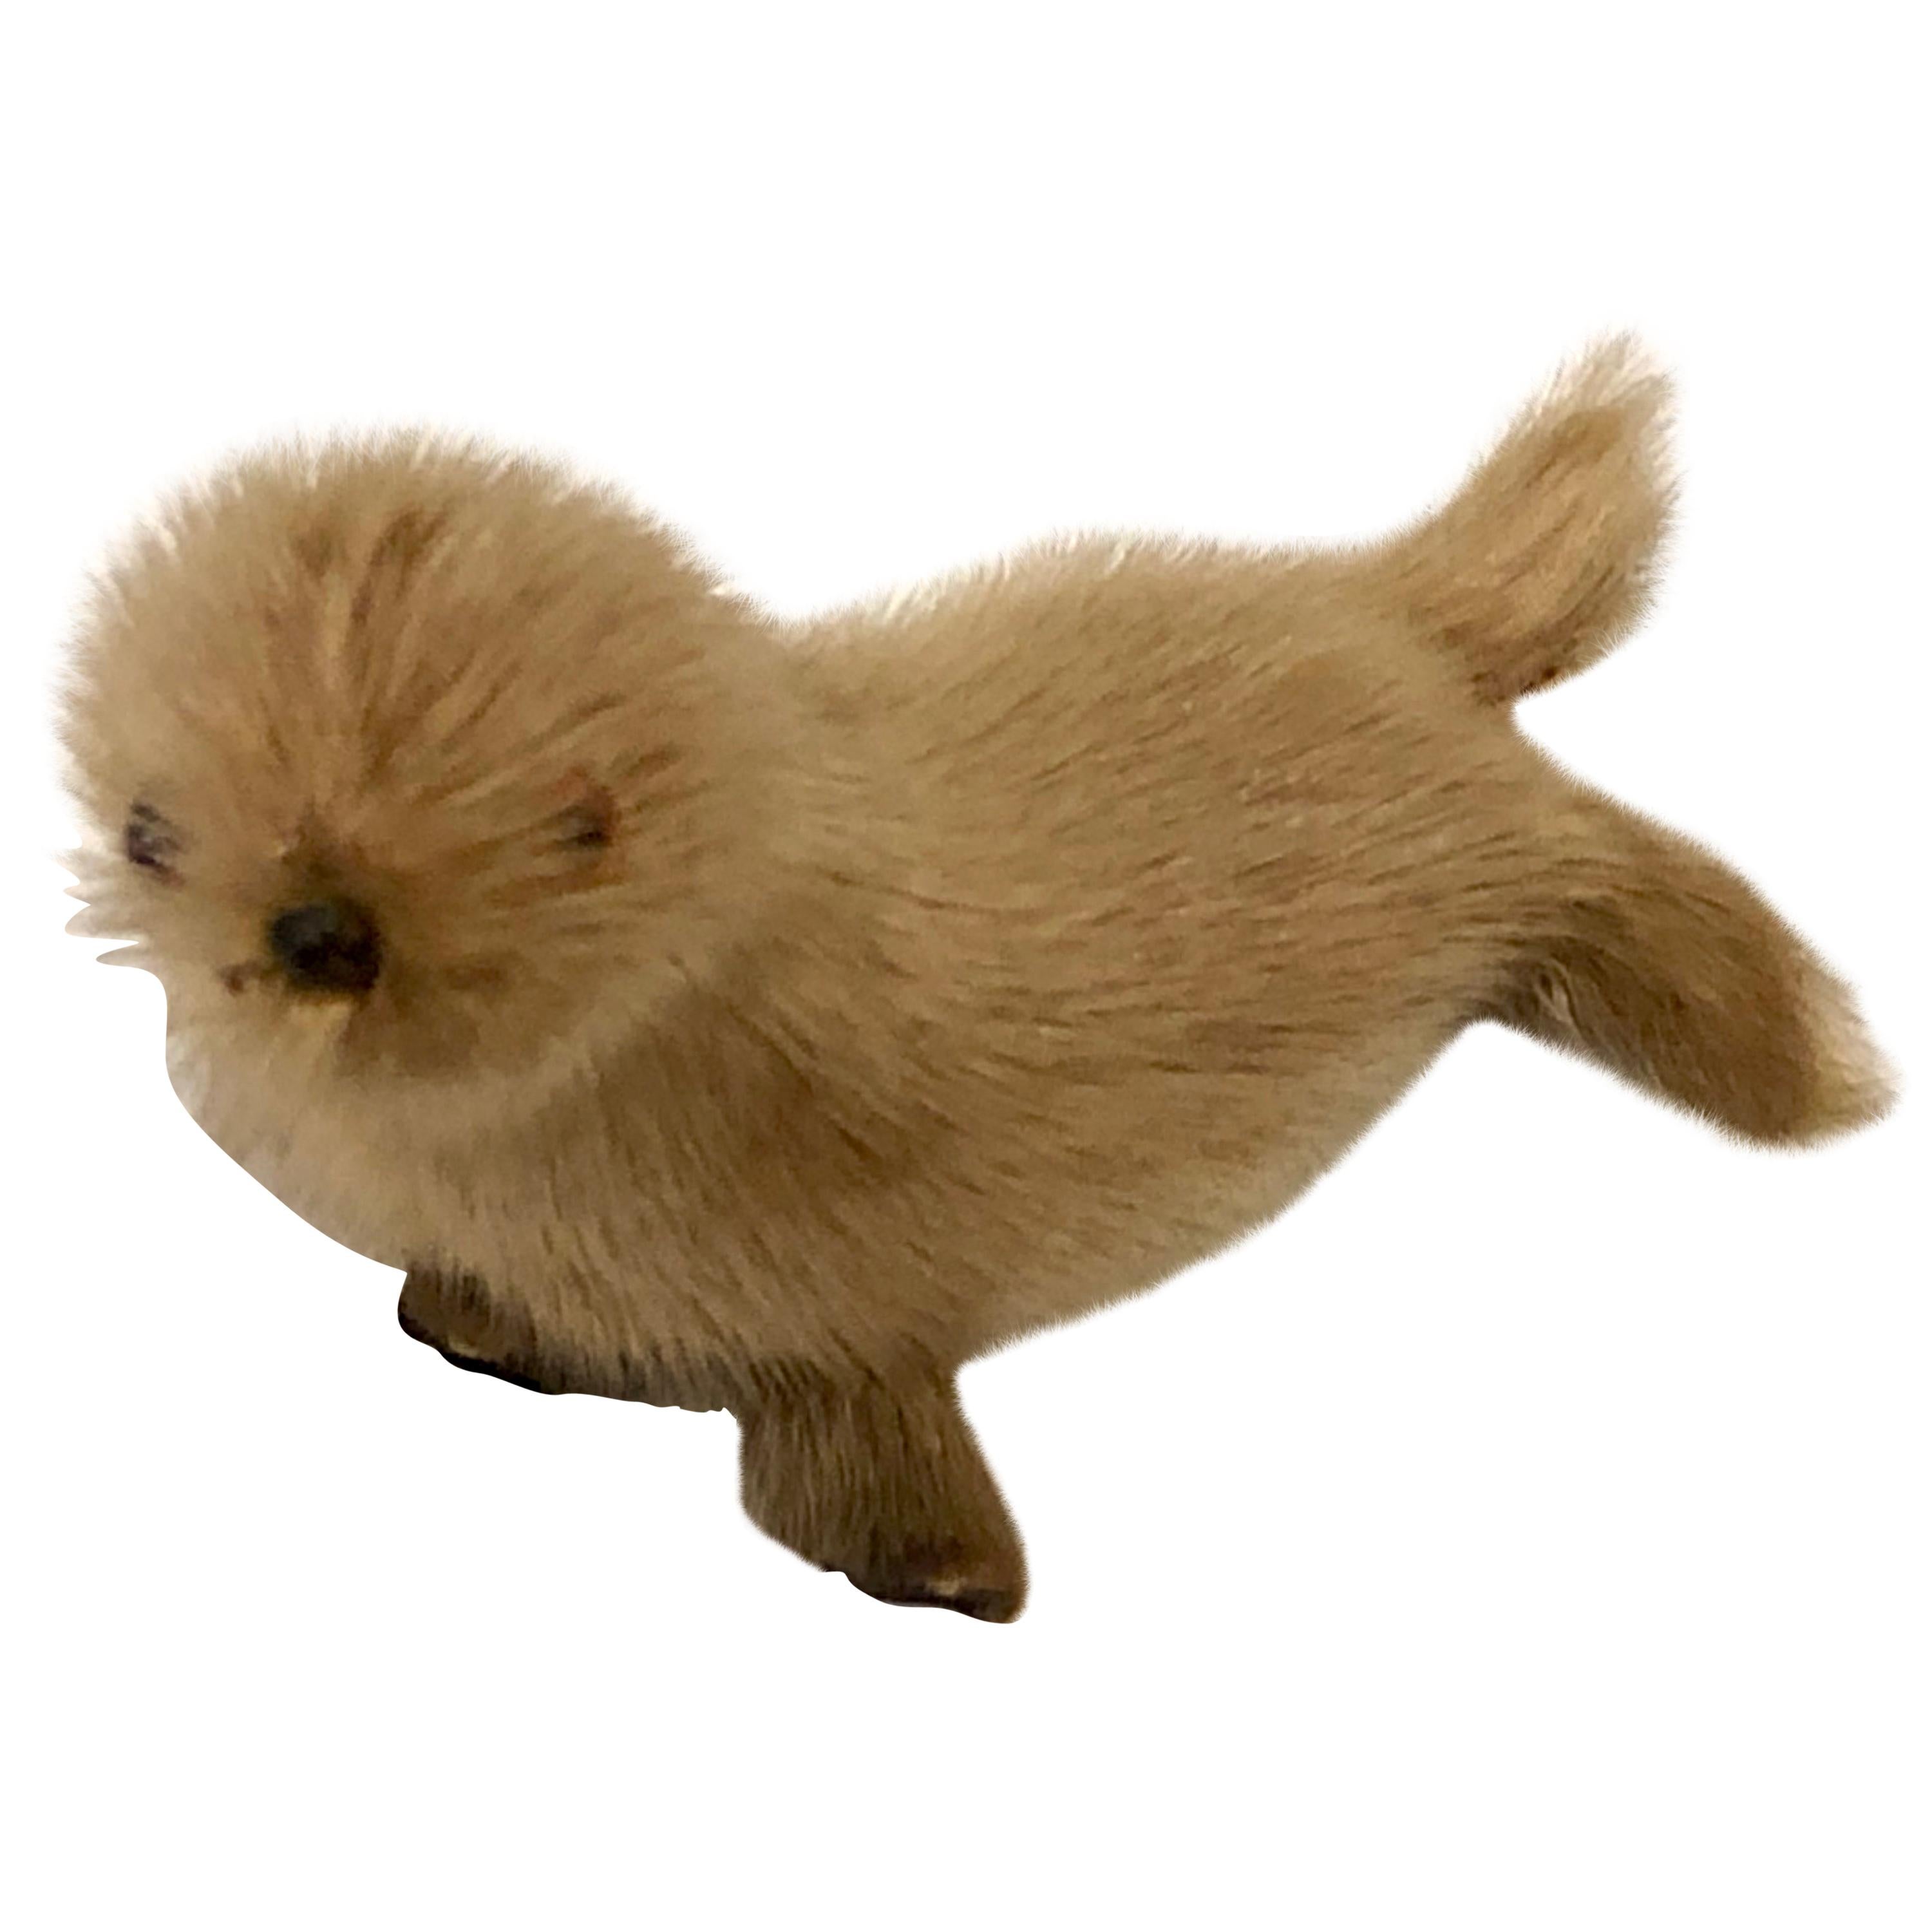 Small Vintage Seal Sculpture Made of Real Fur